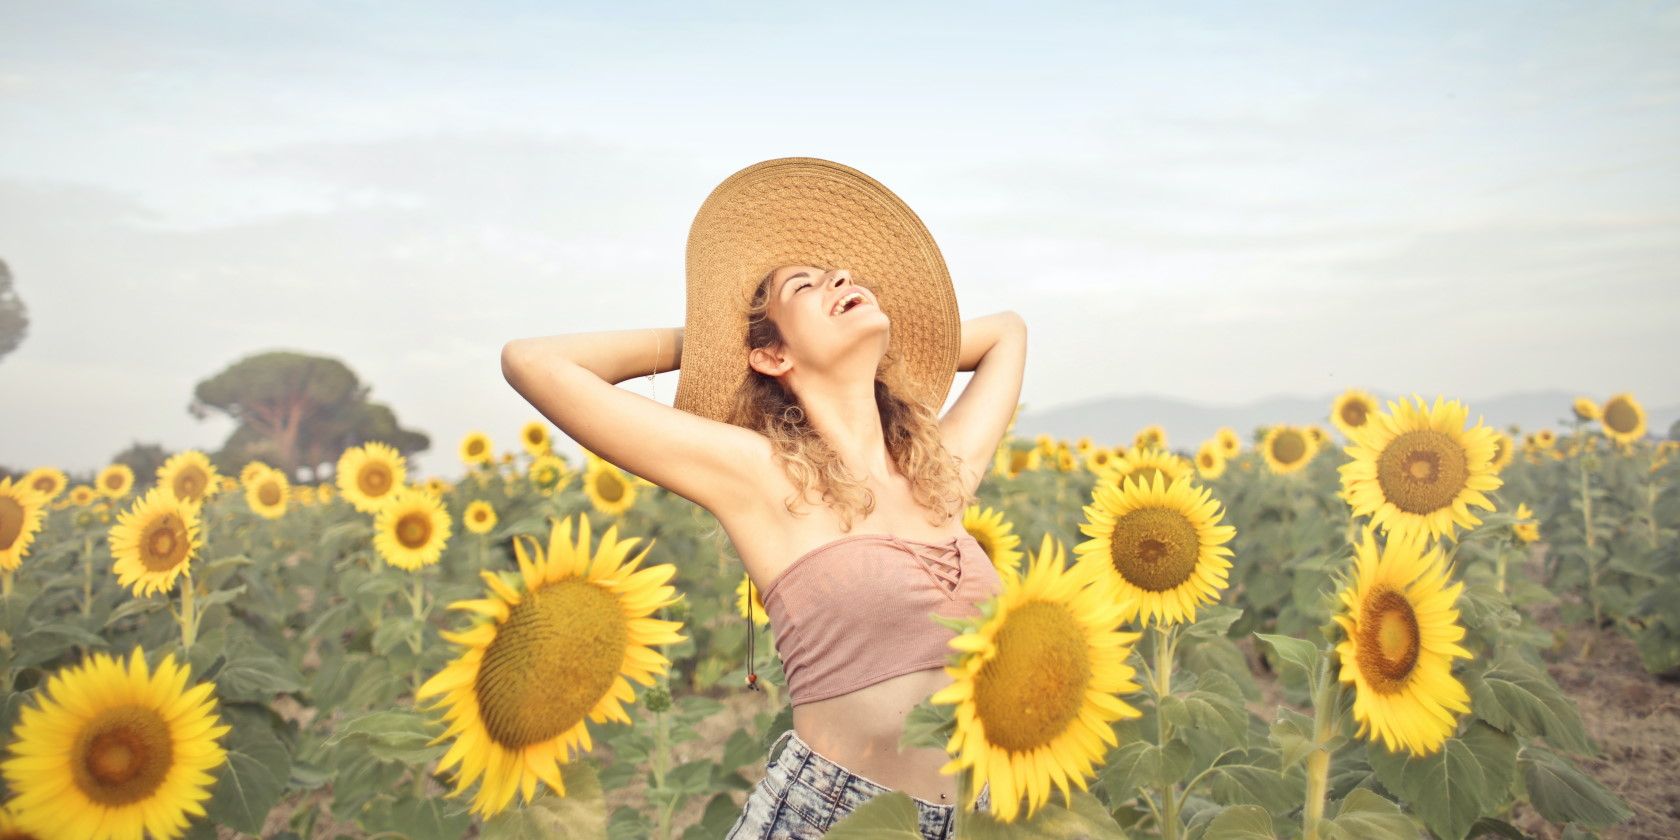 happy woman standing smiling in sunflower field